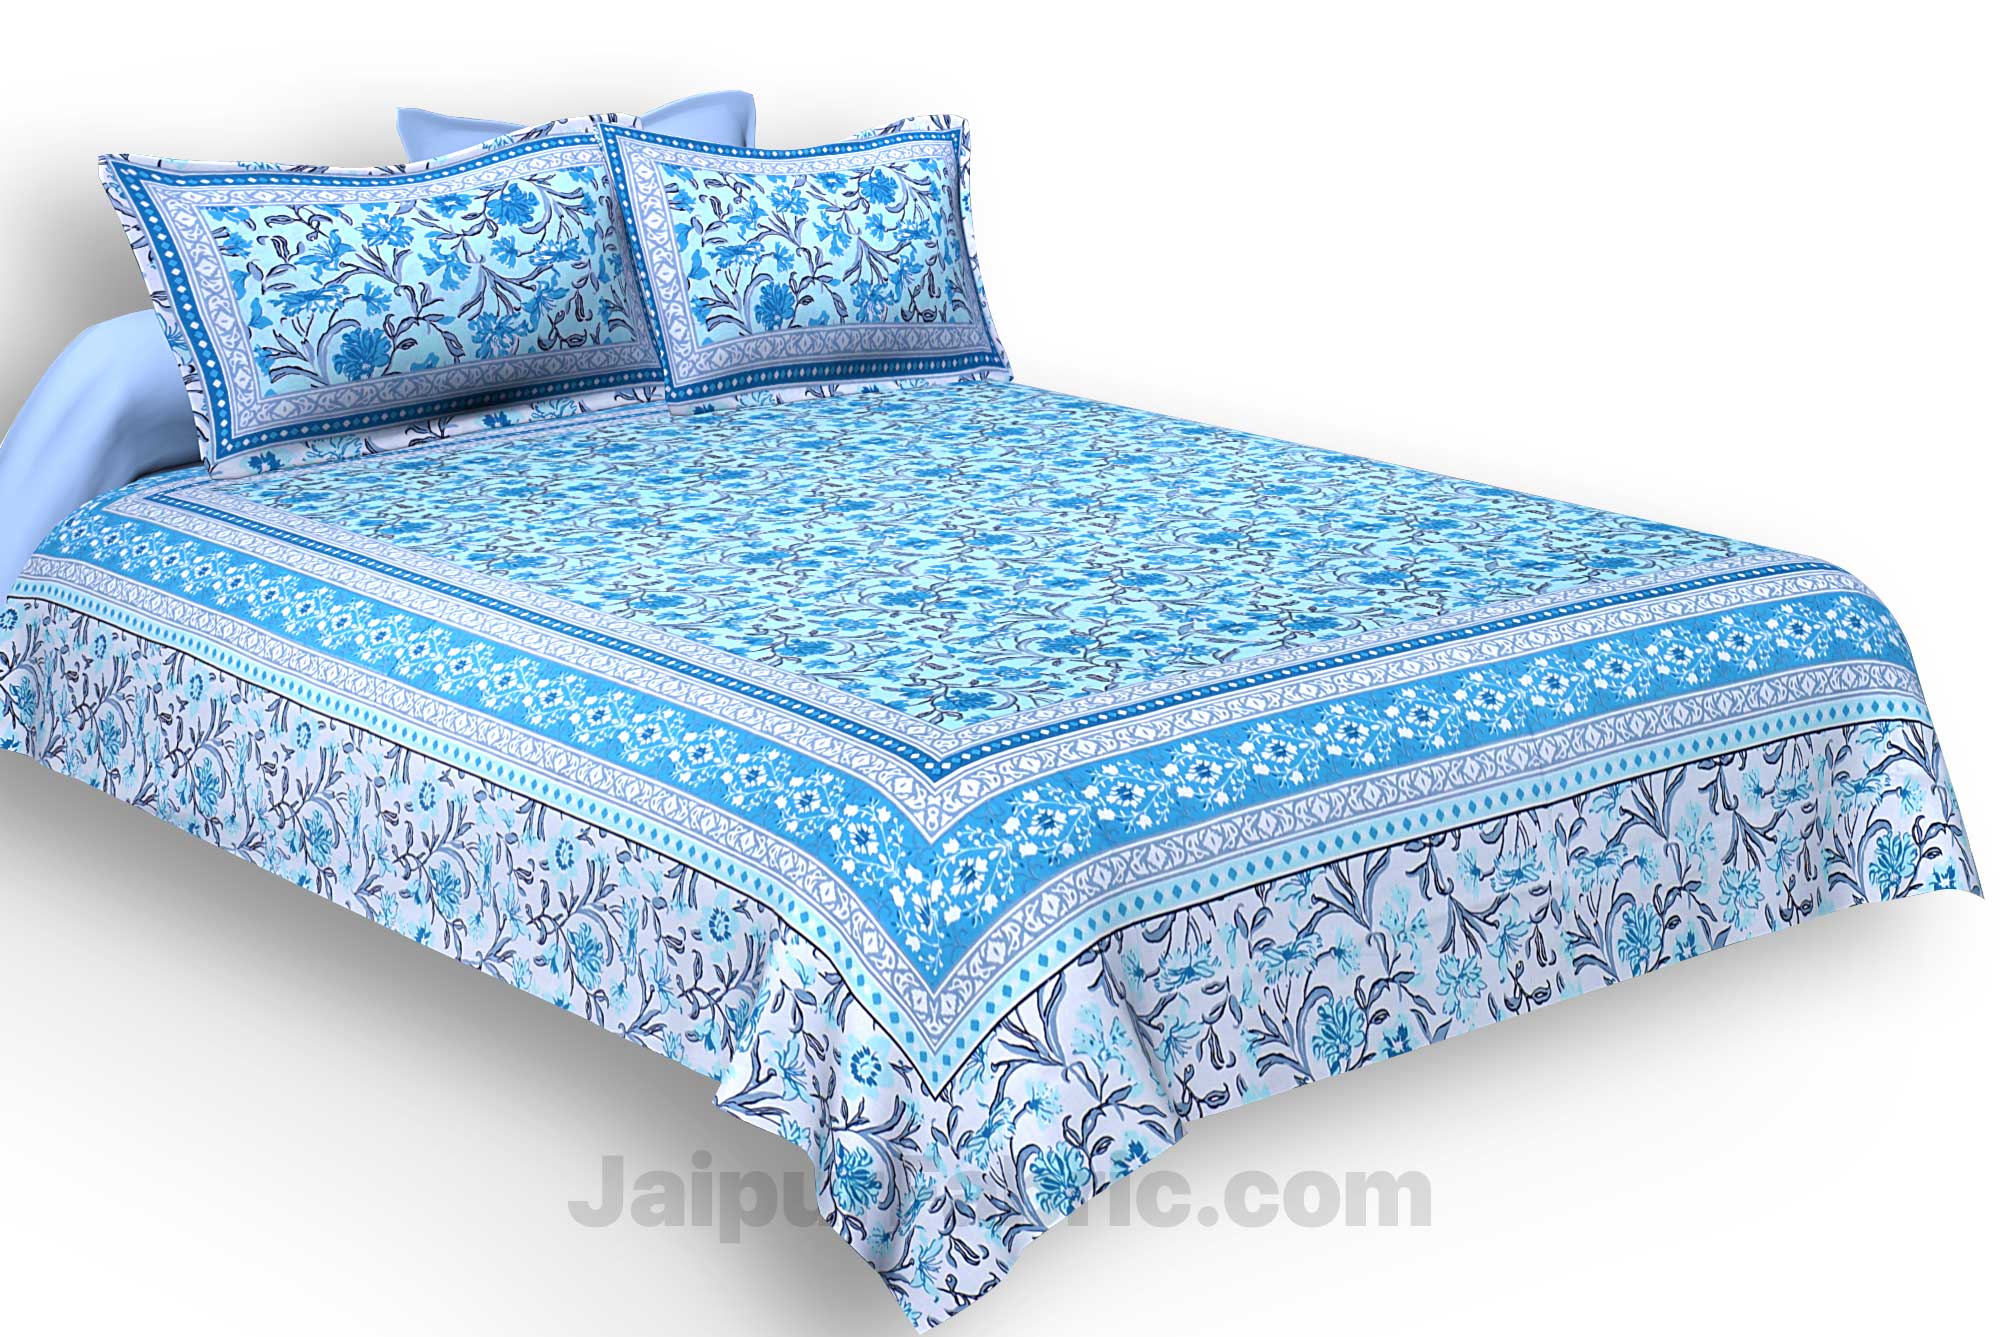 Awesome leaves Blue Cream Double Bedsheet